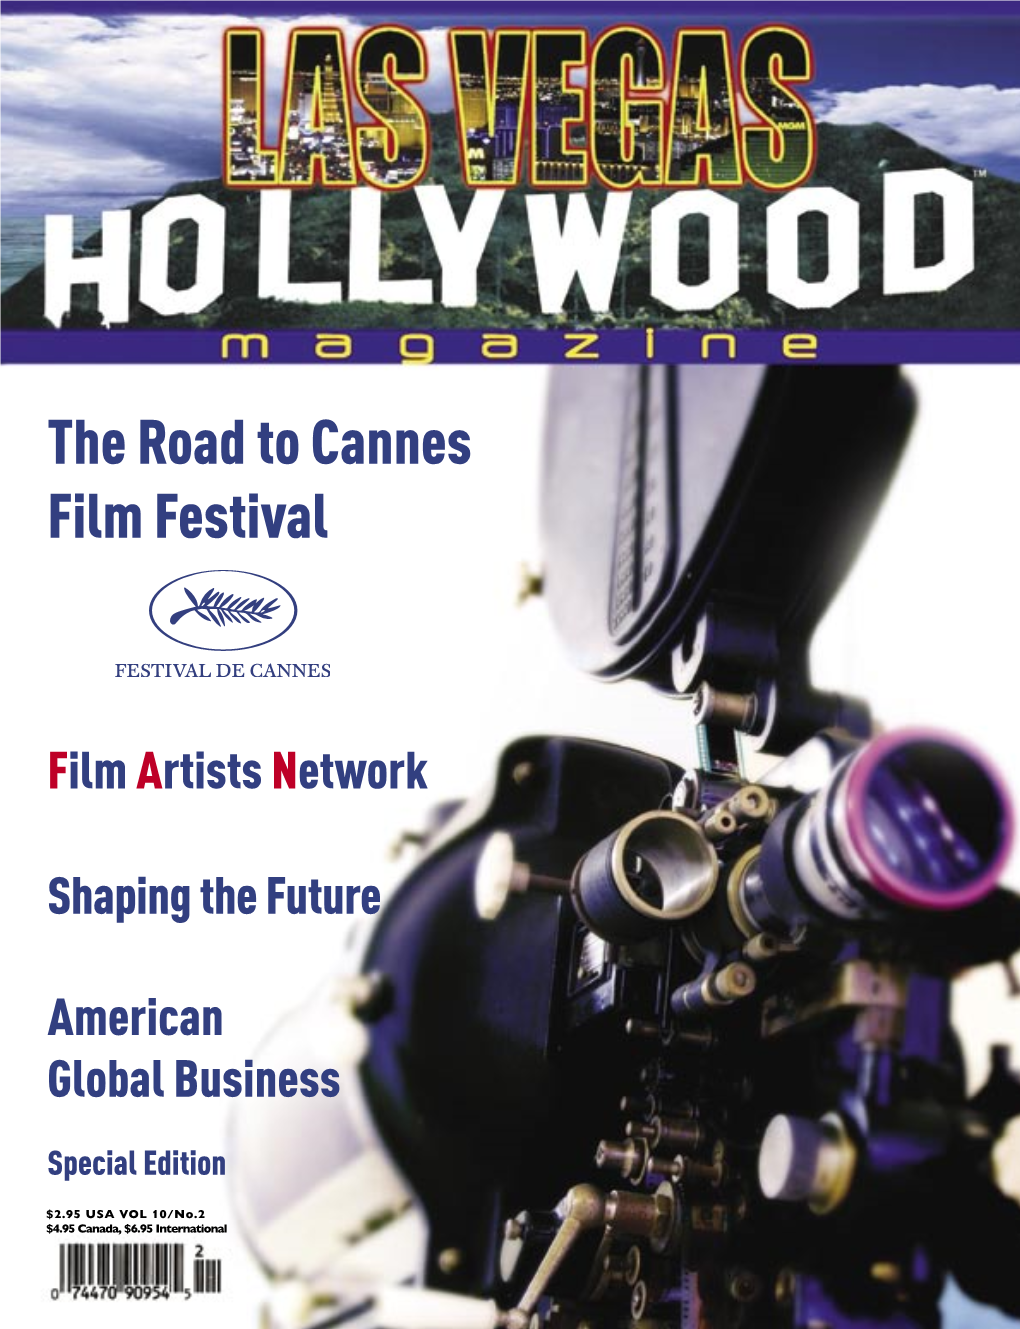 The Road to Cannes Film Festival